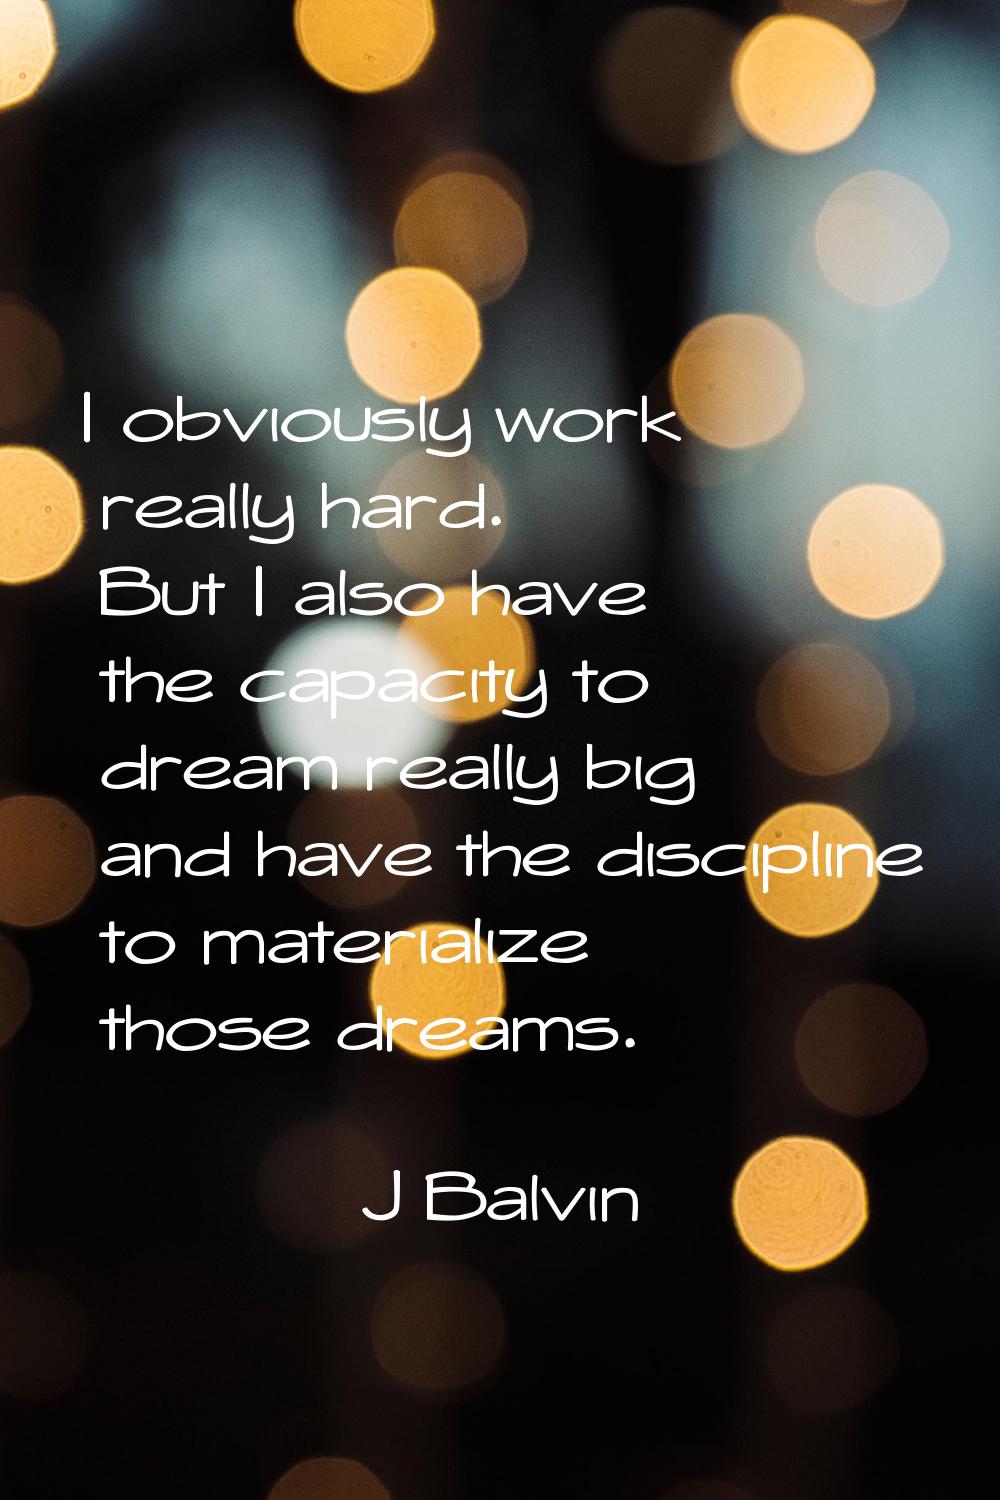 I obviously work really hard. But I also have the capacity to dream really big and have the discipl